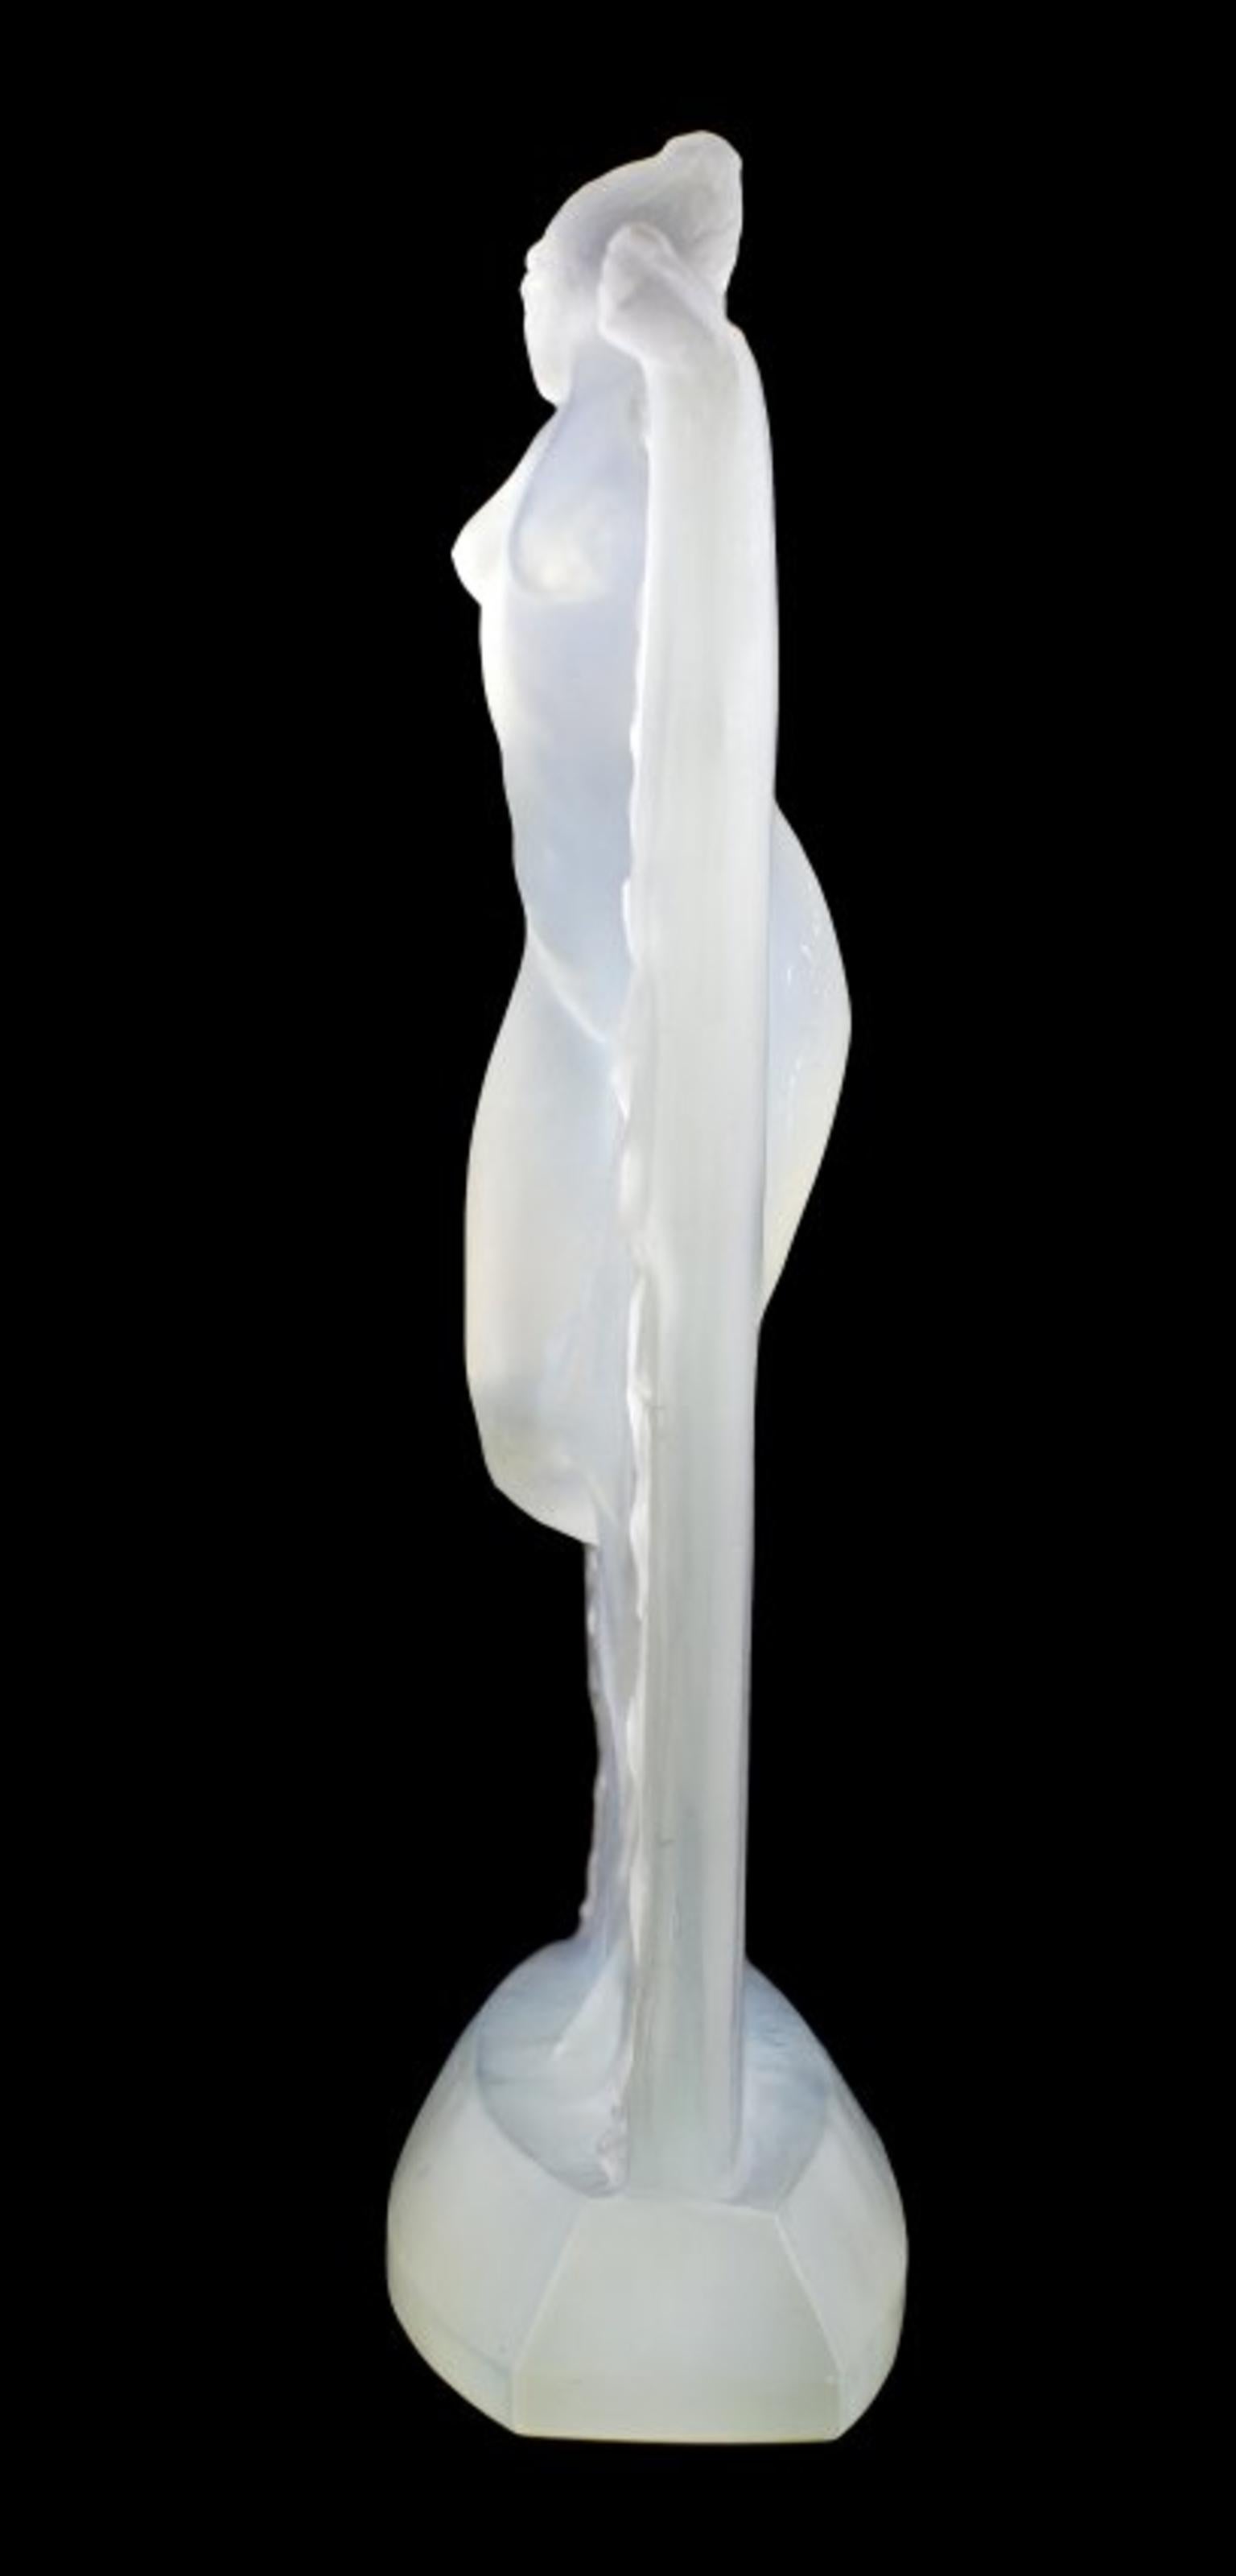 René Lalique
'Suzanne'
An opalescent glass statuette,
Model introduced 1925
Marcilhac 833 
Measures: 9.12 in.(22.8 cm.) high 
Wheel-carved R. Lalique, France.